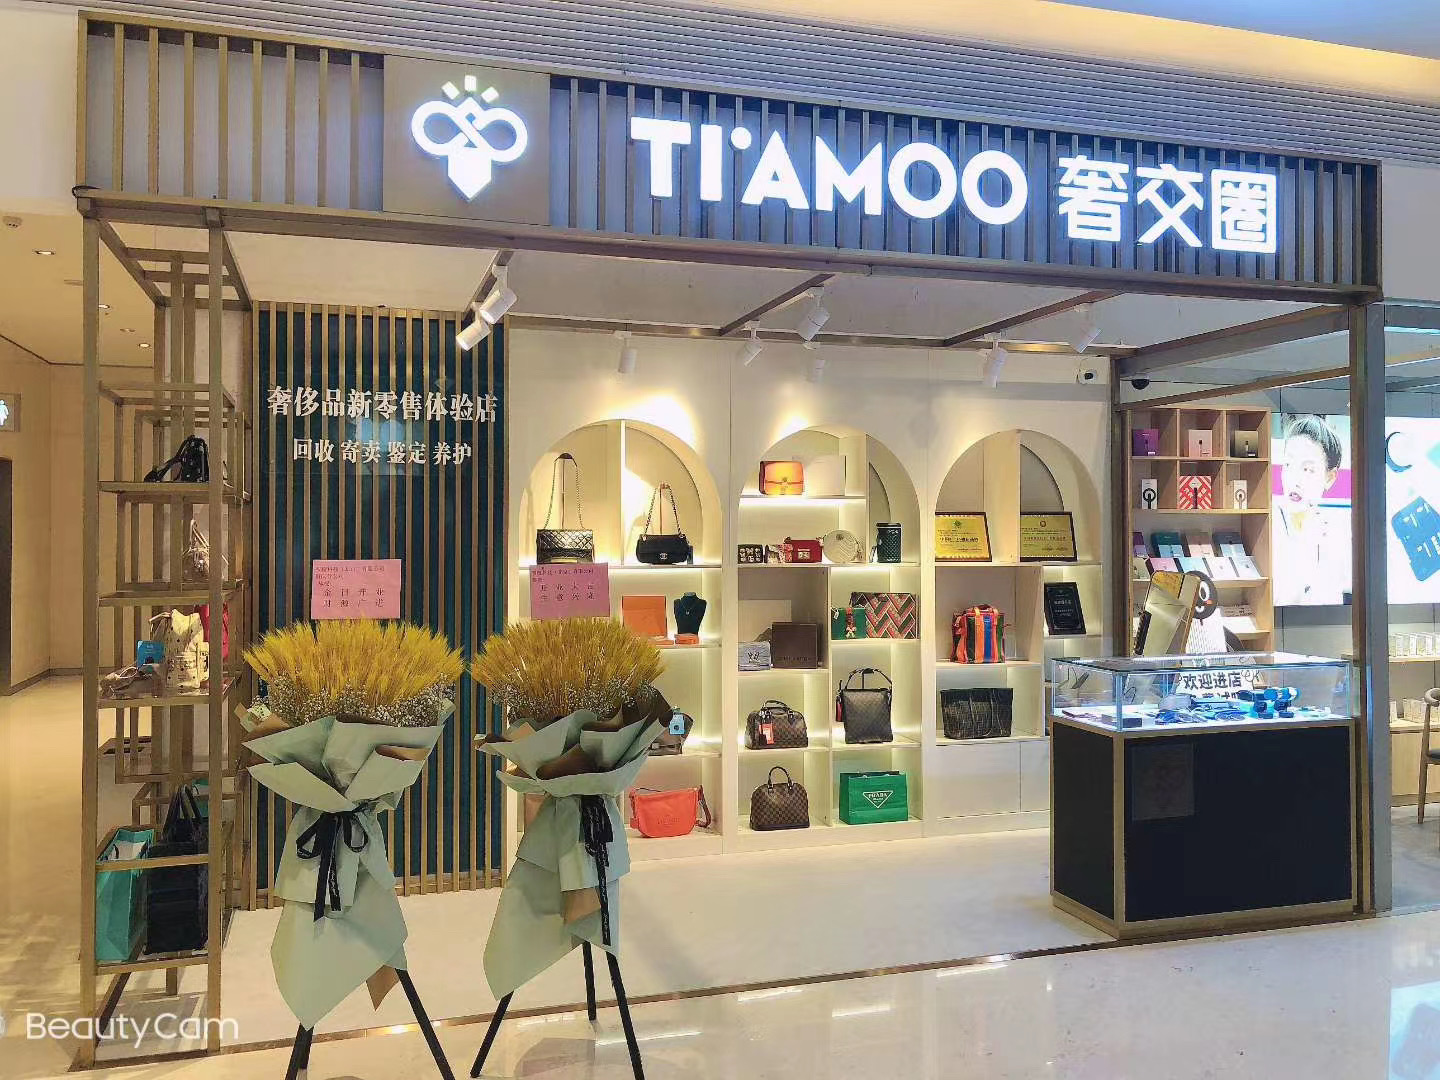 Ti’amoo gives luxury bags a second owner: Inside China’s Startups